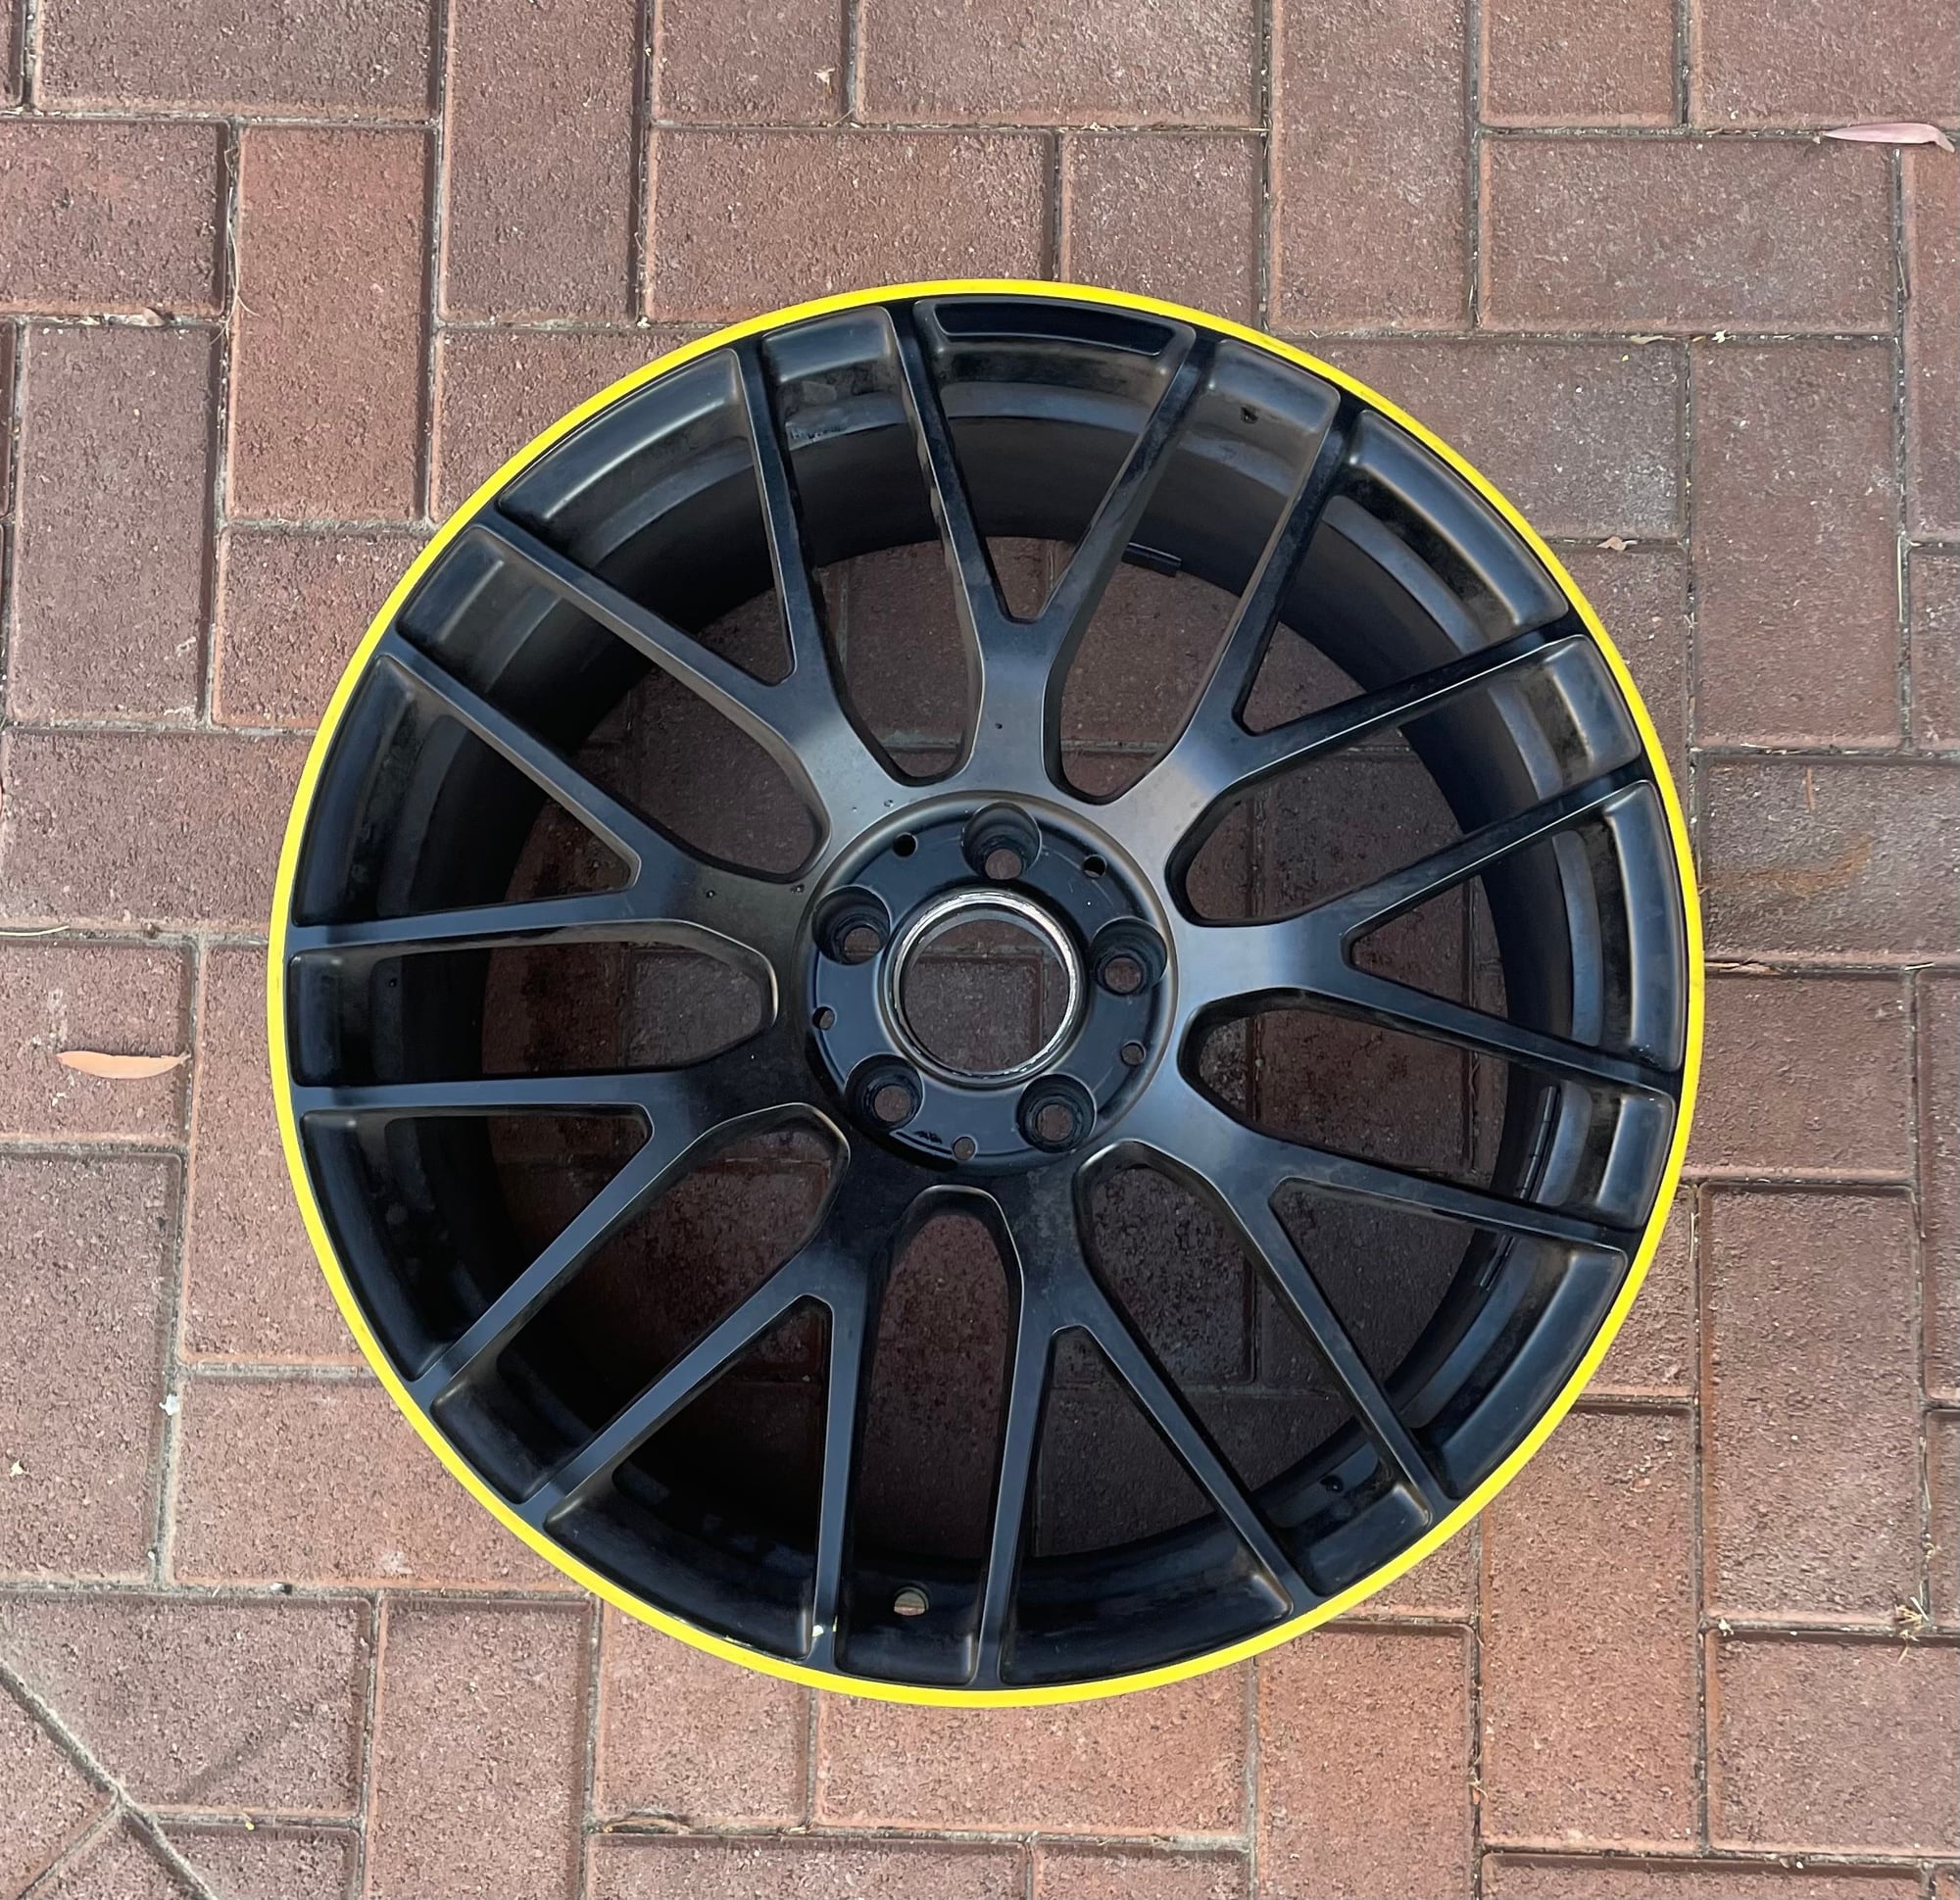 Wheels and Tires/Axles - Single rim for sale. Black / yellow - Used - All Years Mercedes-Benz All Models - Dana Point, CA 92629, United States